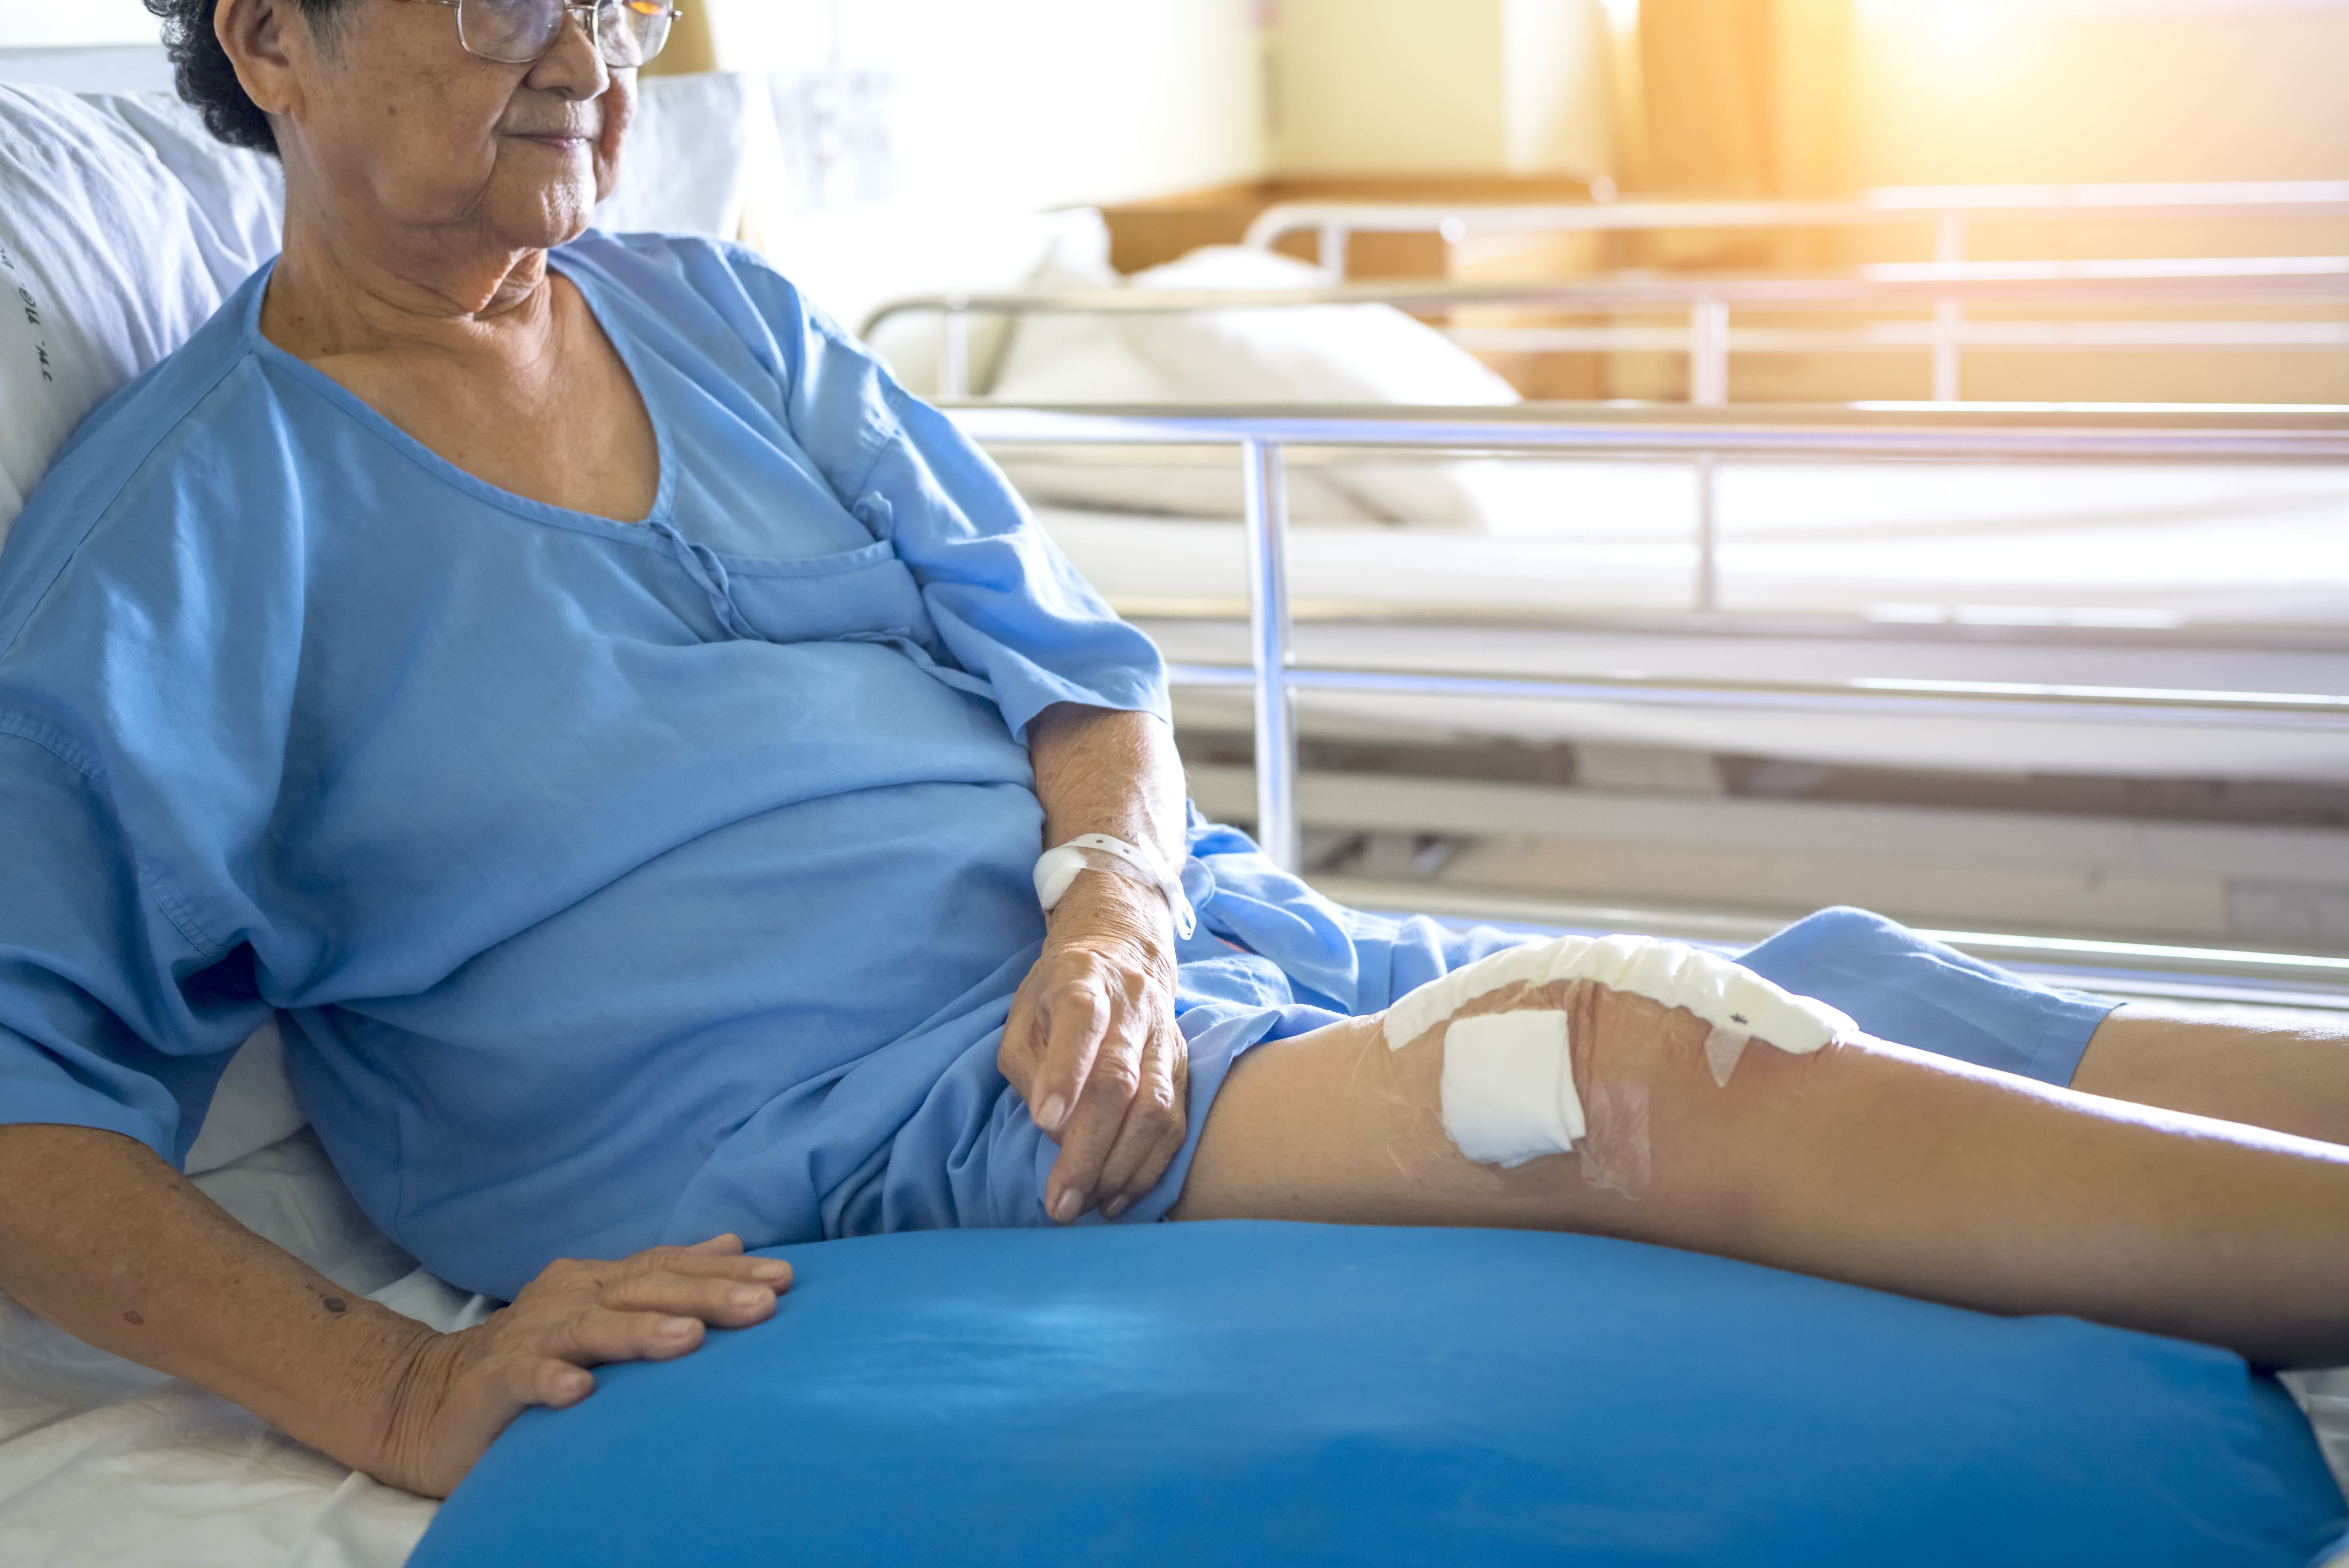 Musculoskeletal Disease May Follow a Total Knee Replacement